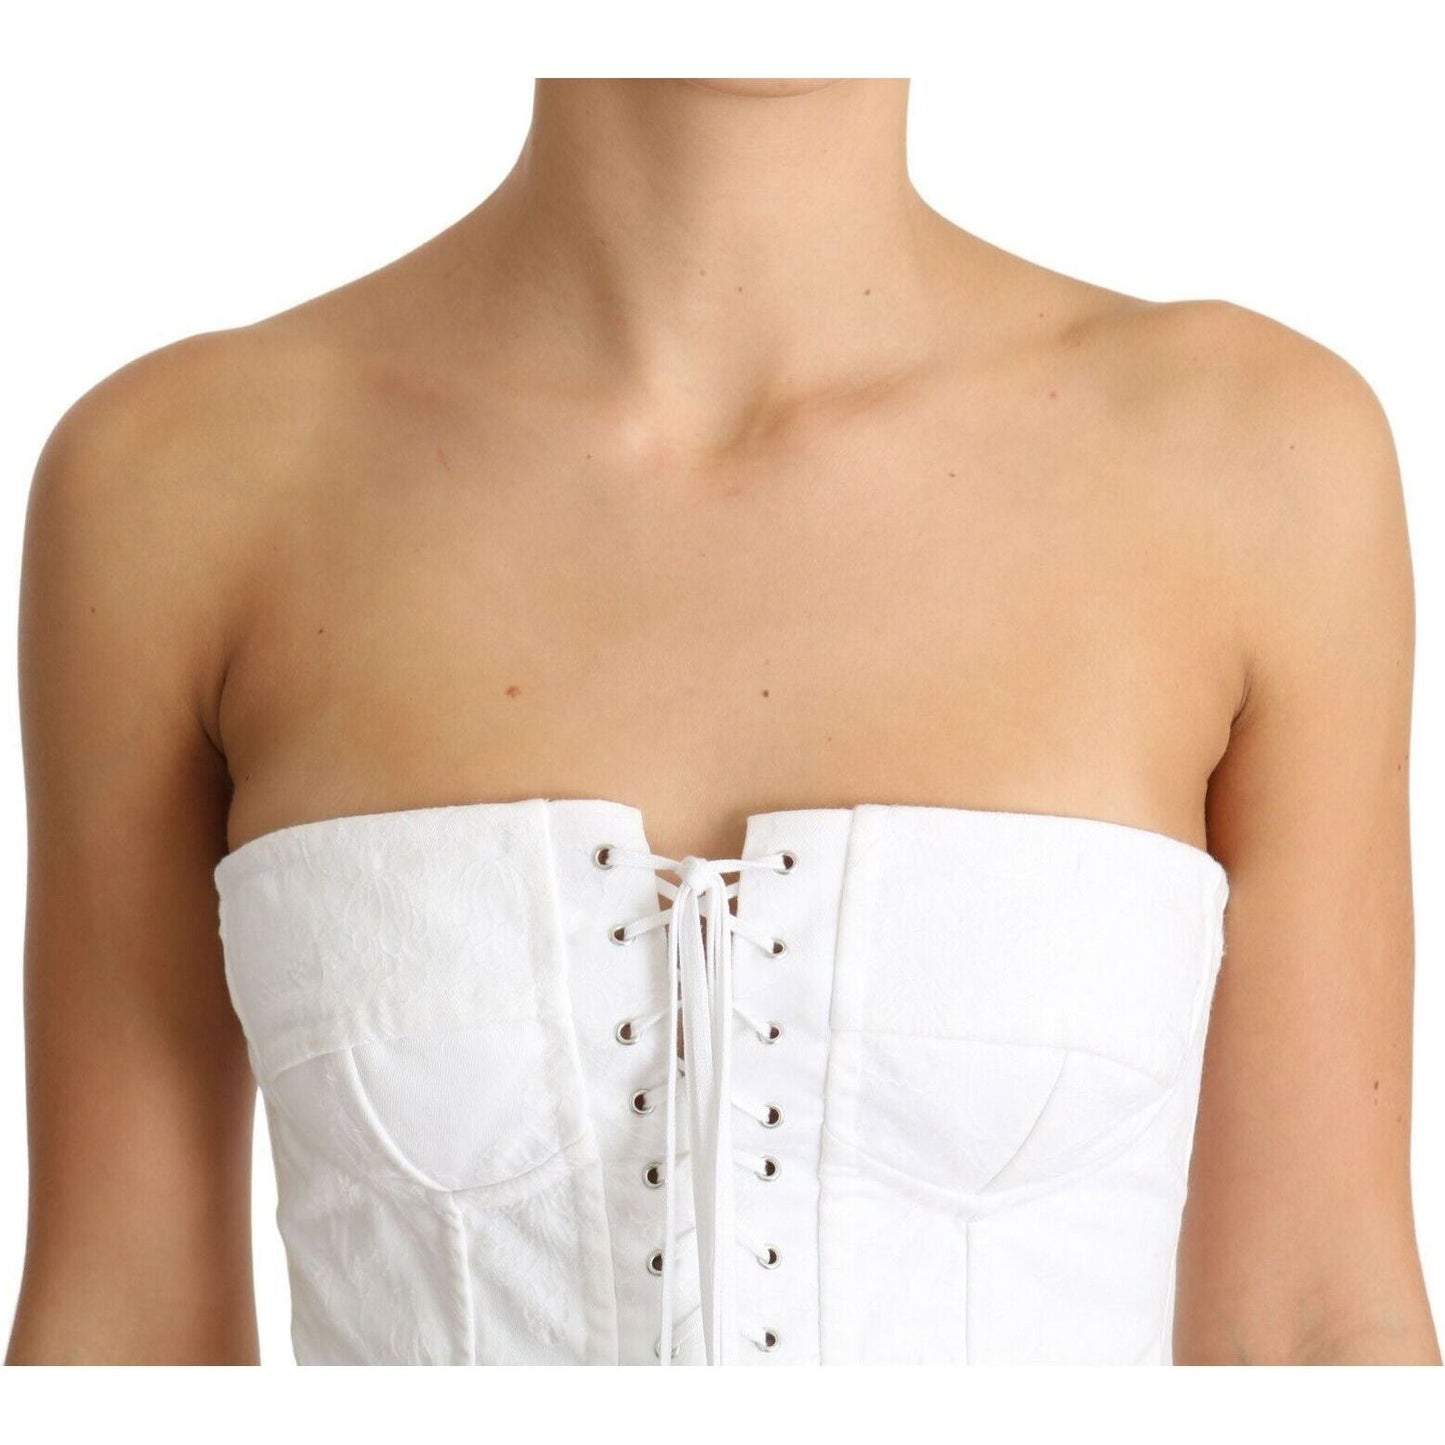 Dolce & Gabbana Elegant White Strapless Corset Top WOMAN TOPS AND SHIRTS white-palermo-bustier-cotton-top-corset